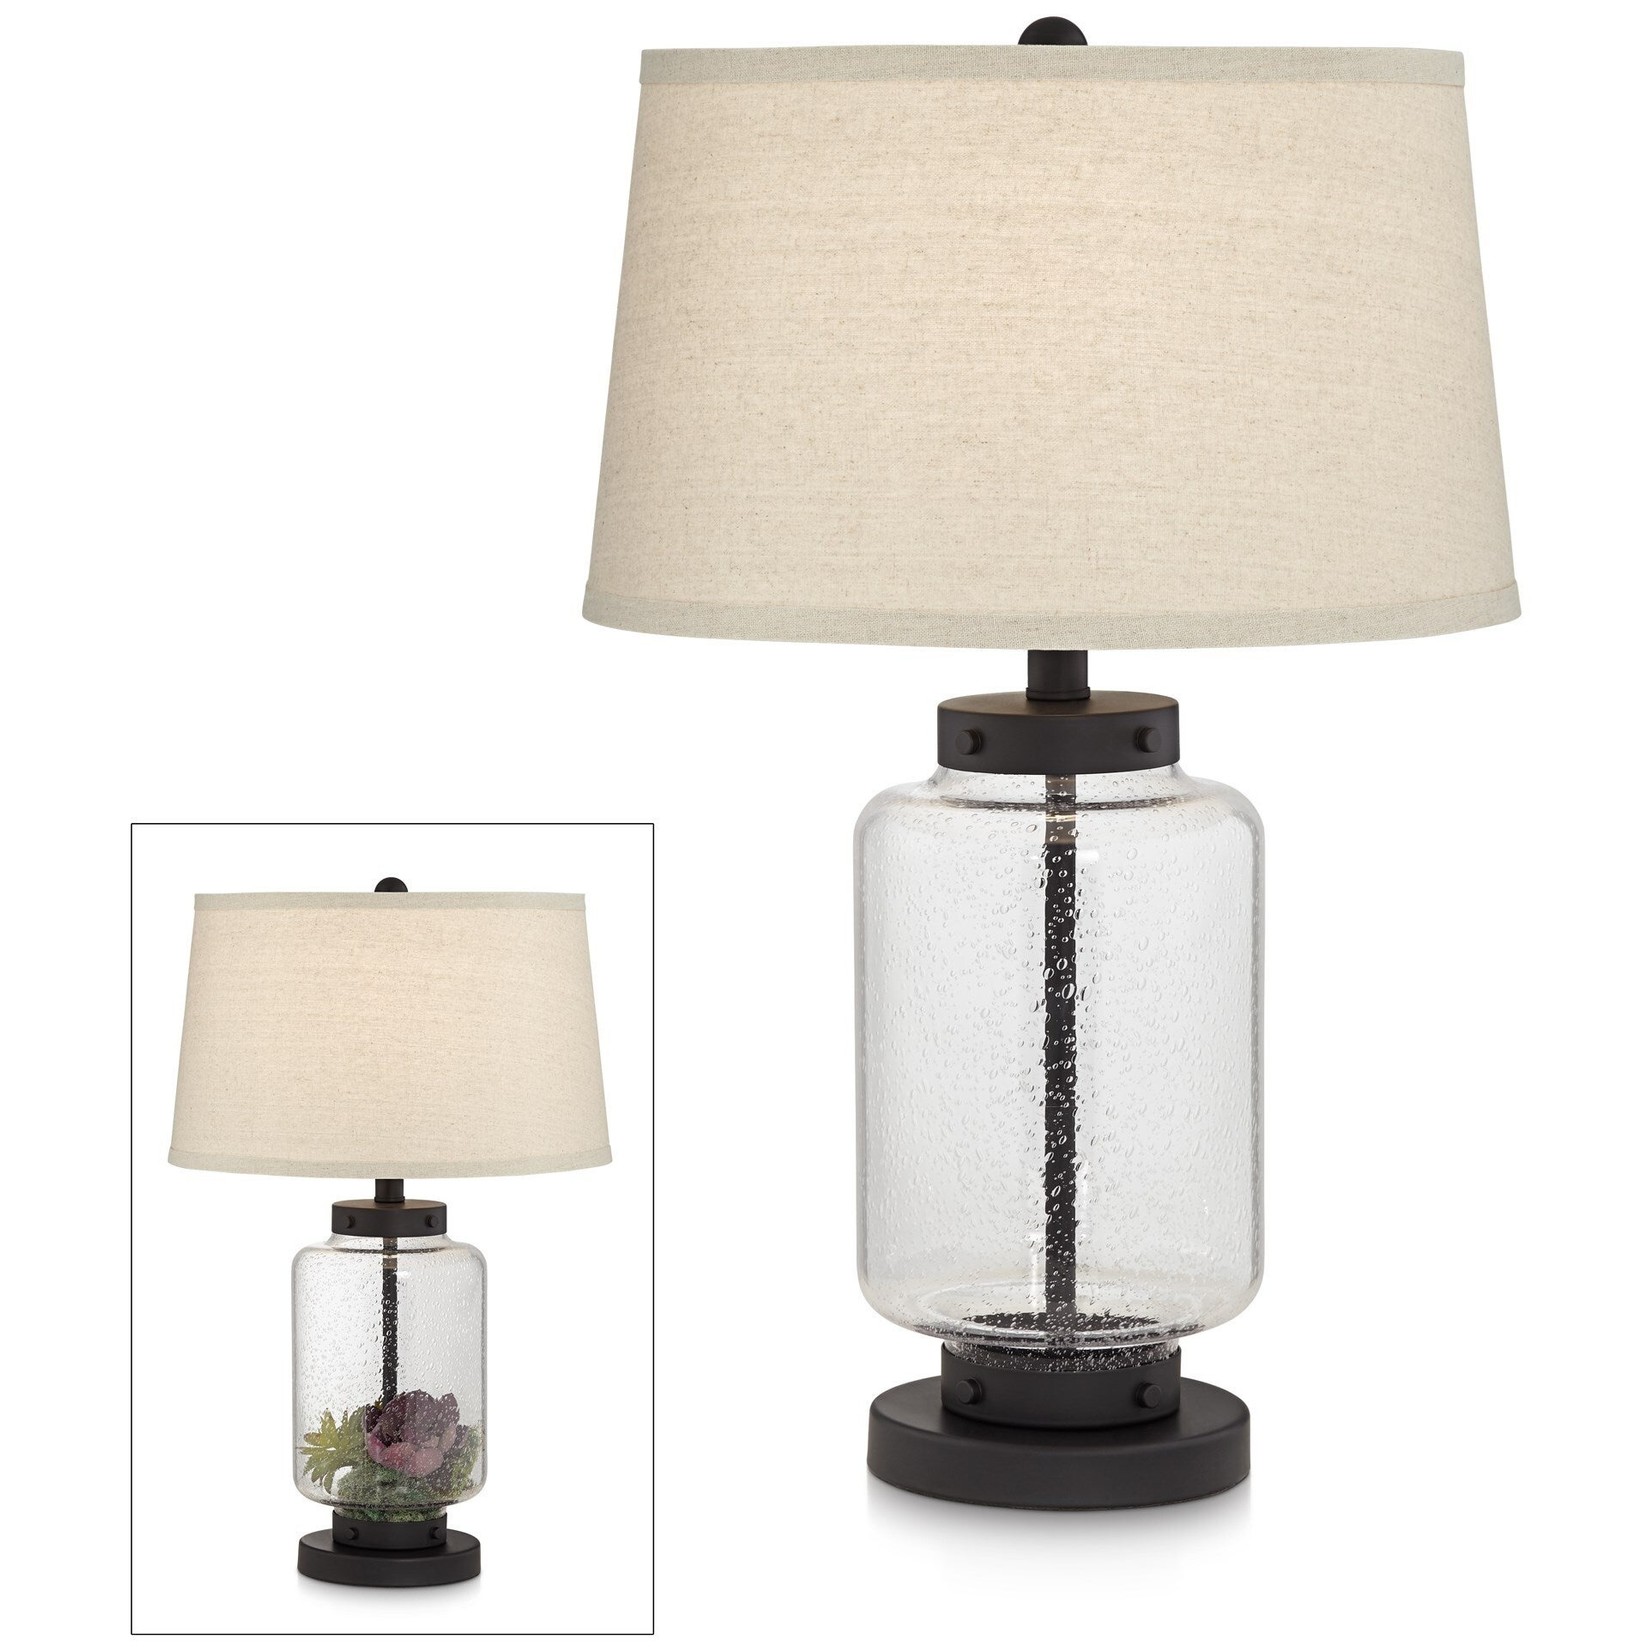 Collector's Dream Table Lamp